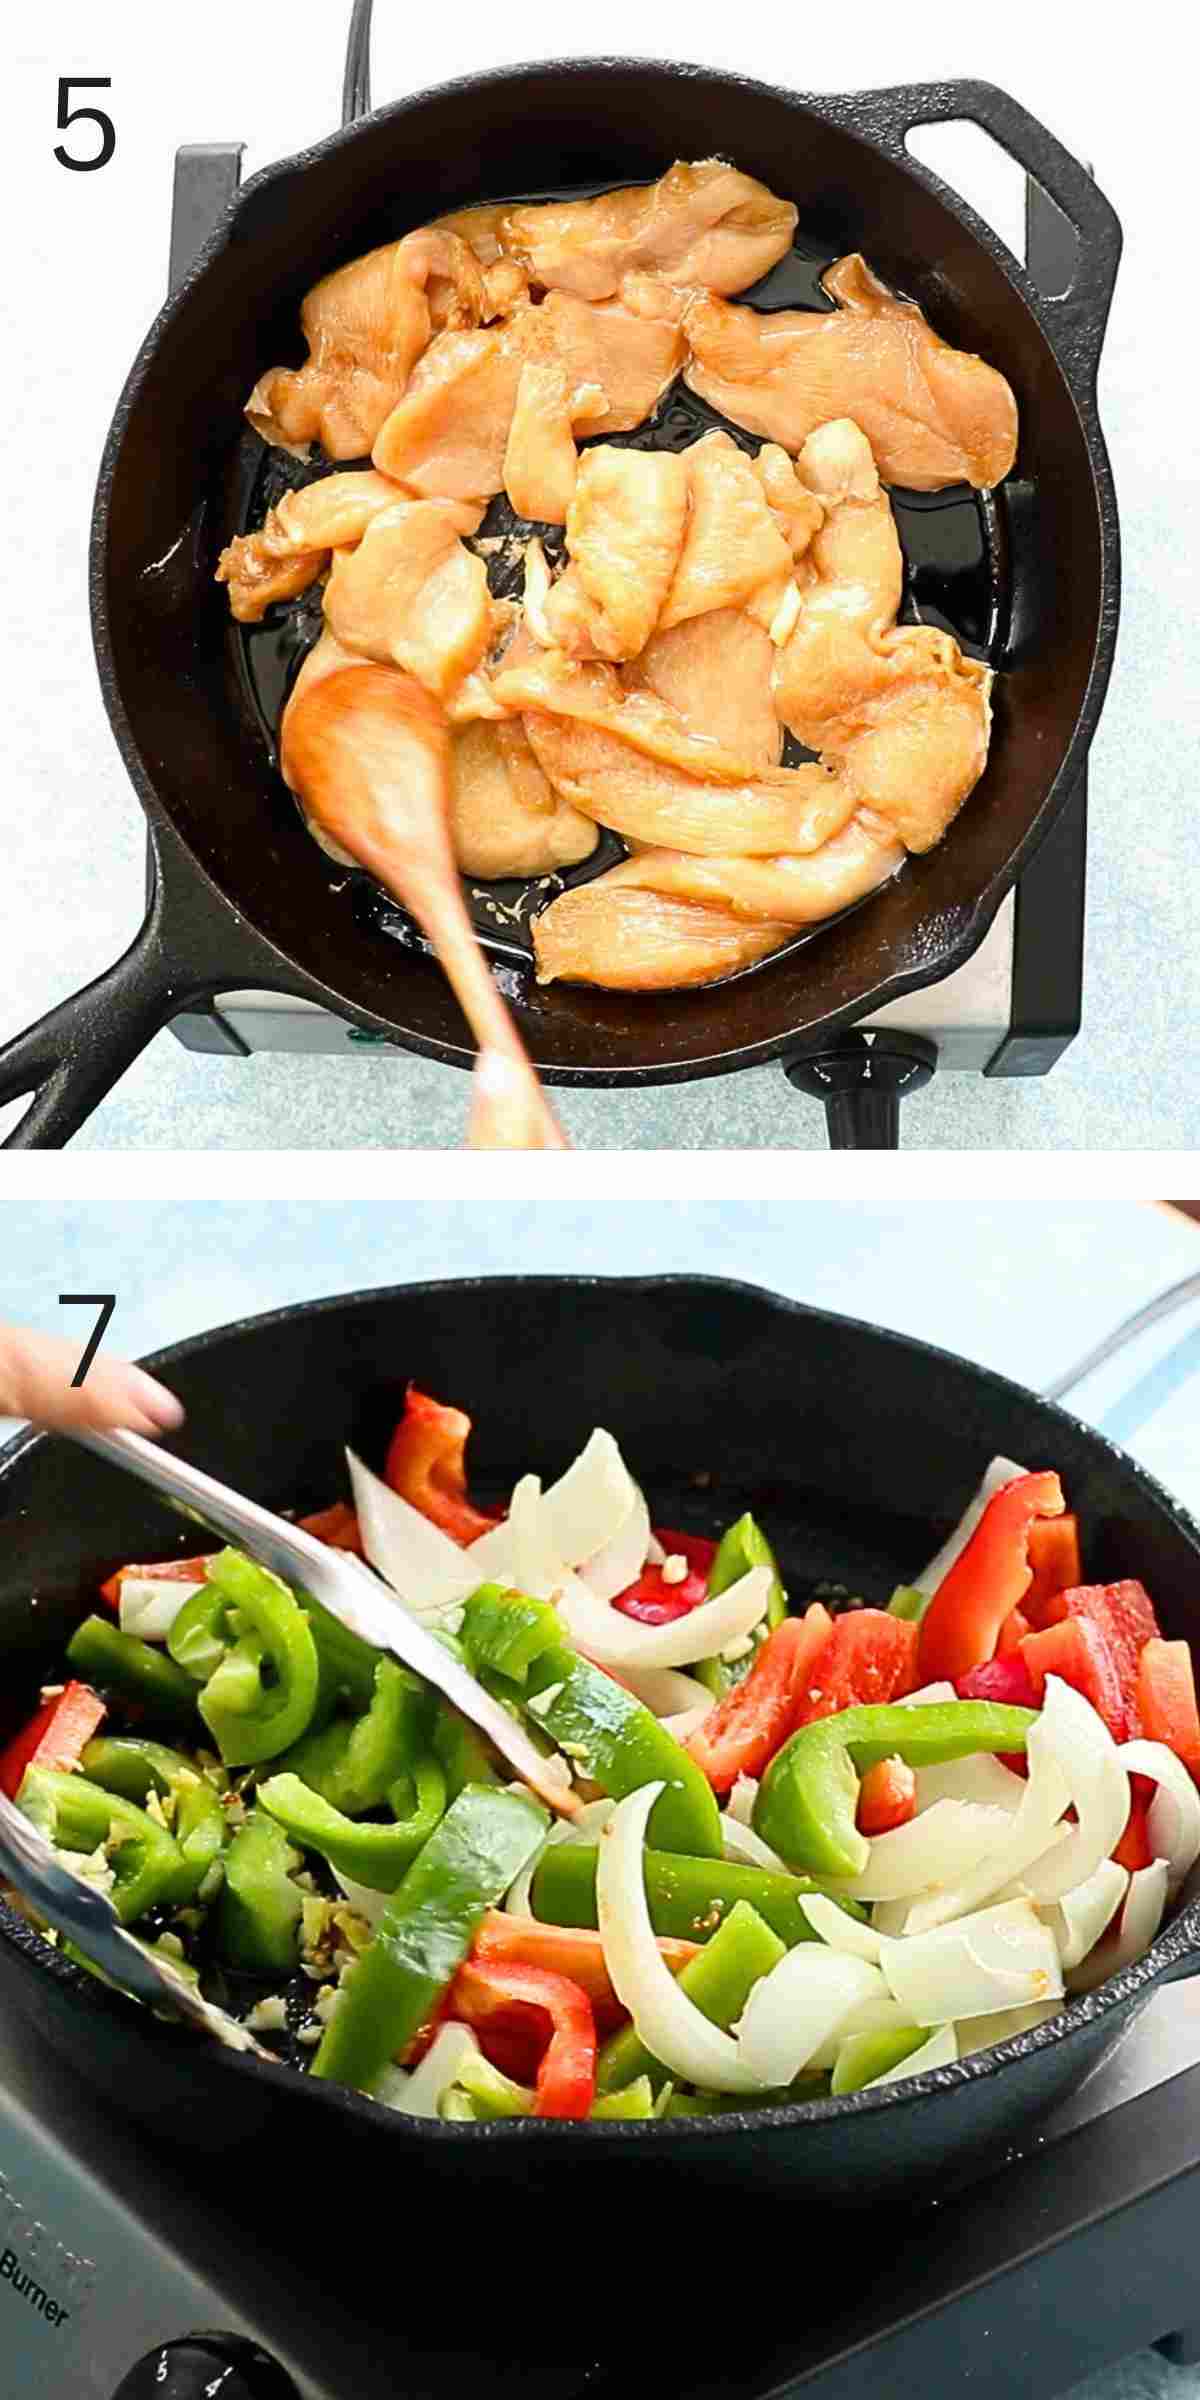 2 photo collage of chicken and bell peppers cooing in a black skillet.